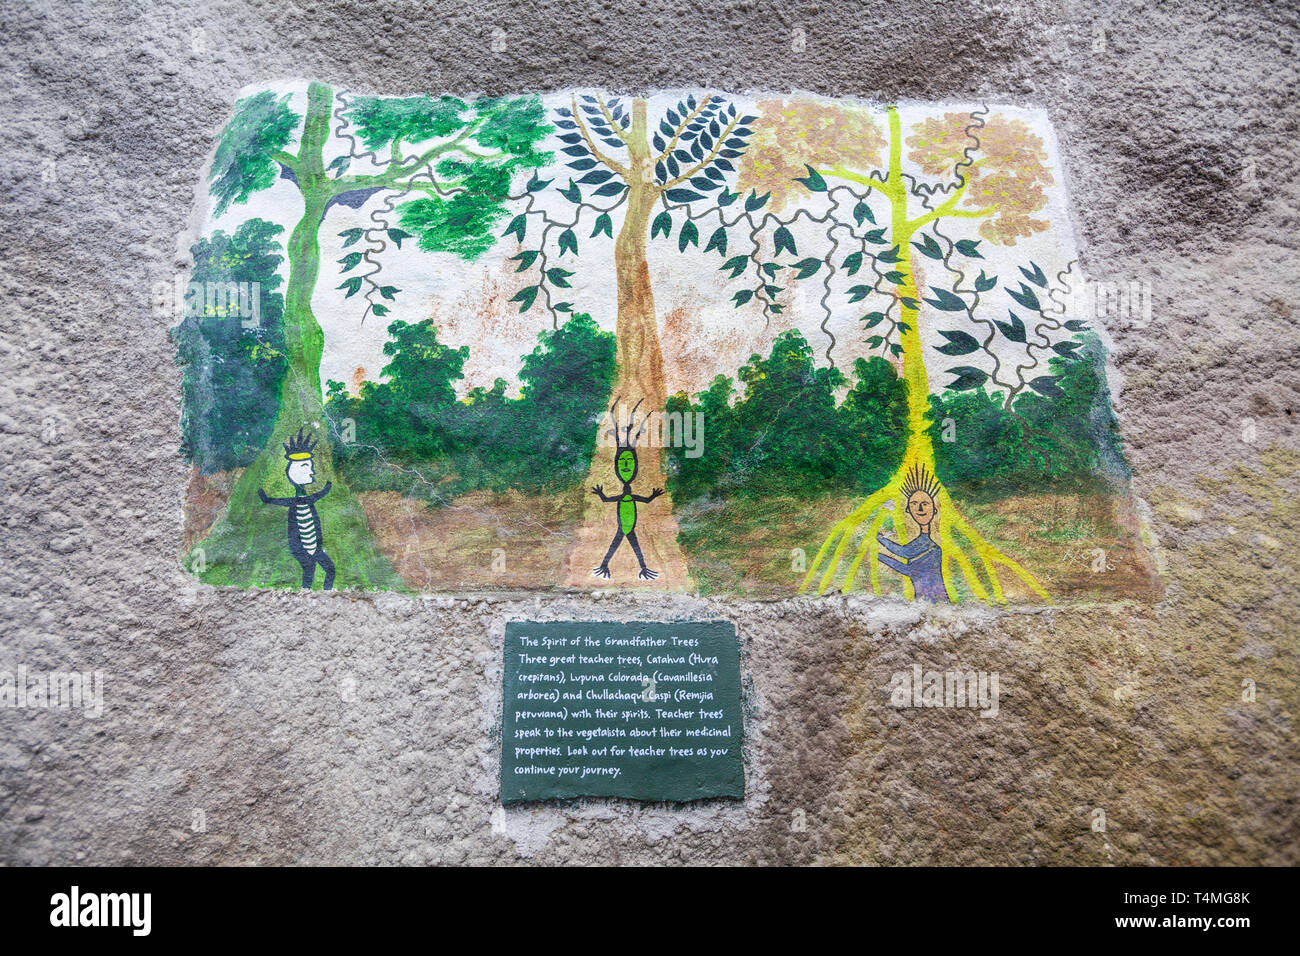 Wall paintings inside the Rainforest Biome at the Eden Project, Cornwall, England Stock Photo